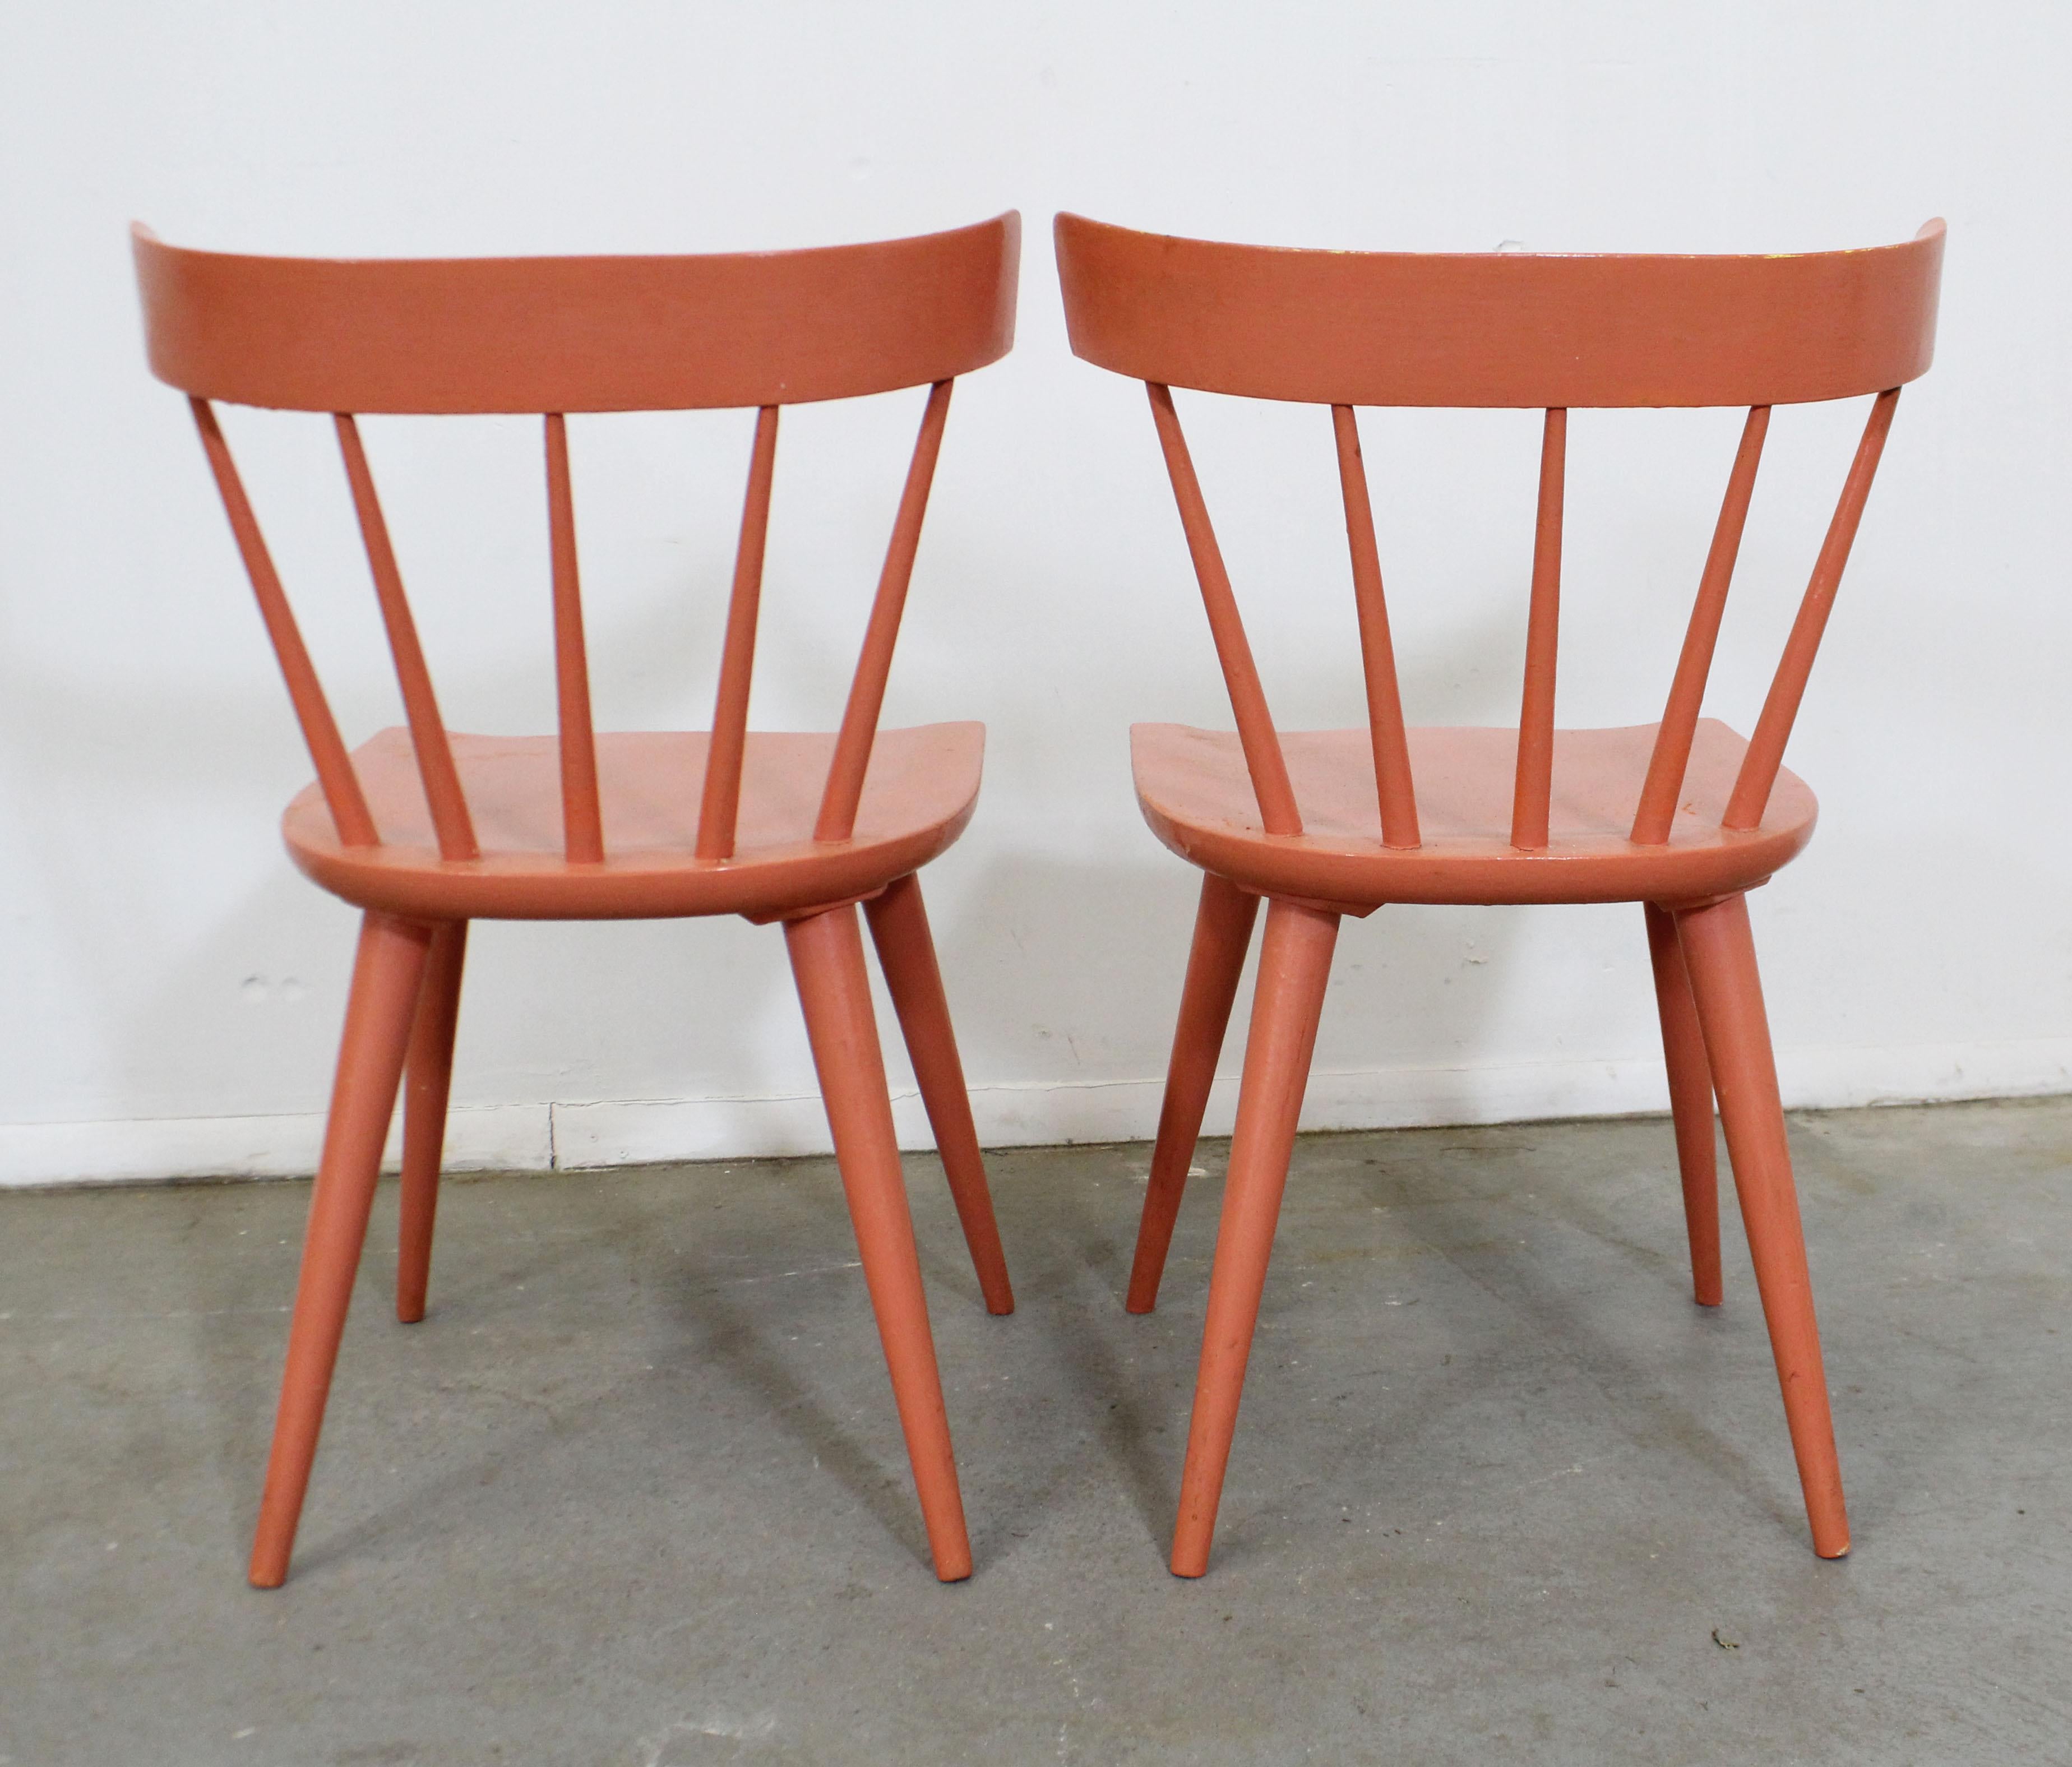 Mid-Century Modern Pair of Midcentury Danish Modern Paul McCobb Spindle Back Side Dining Chairs